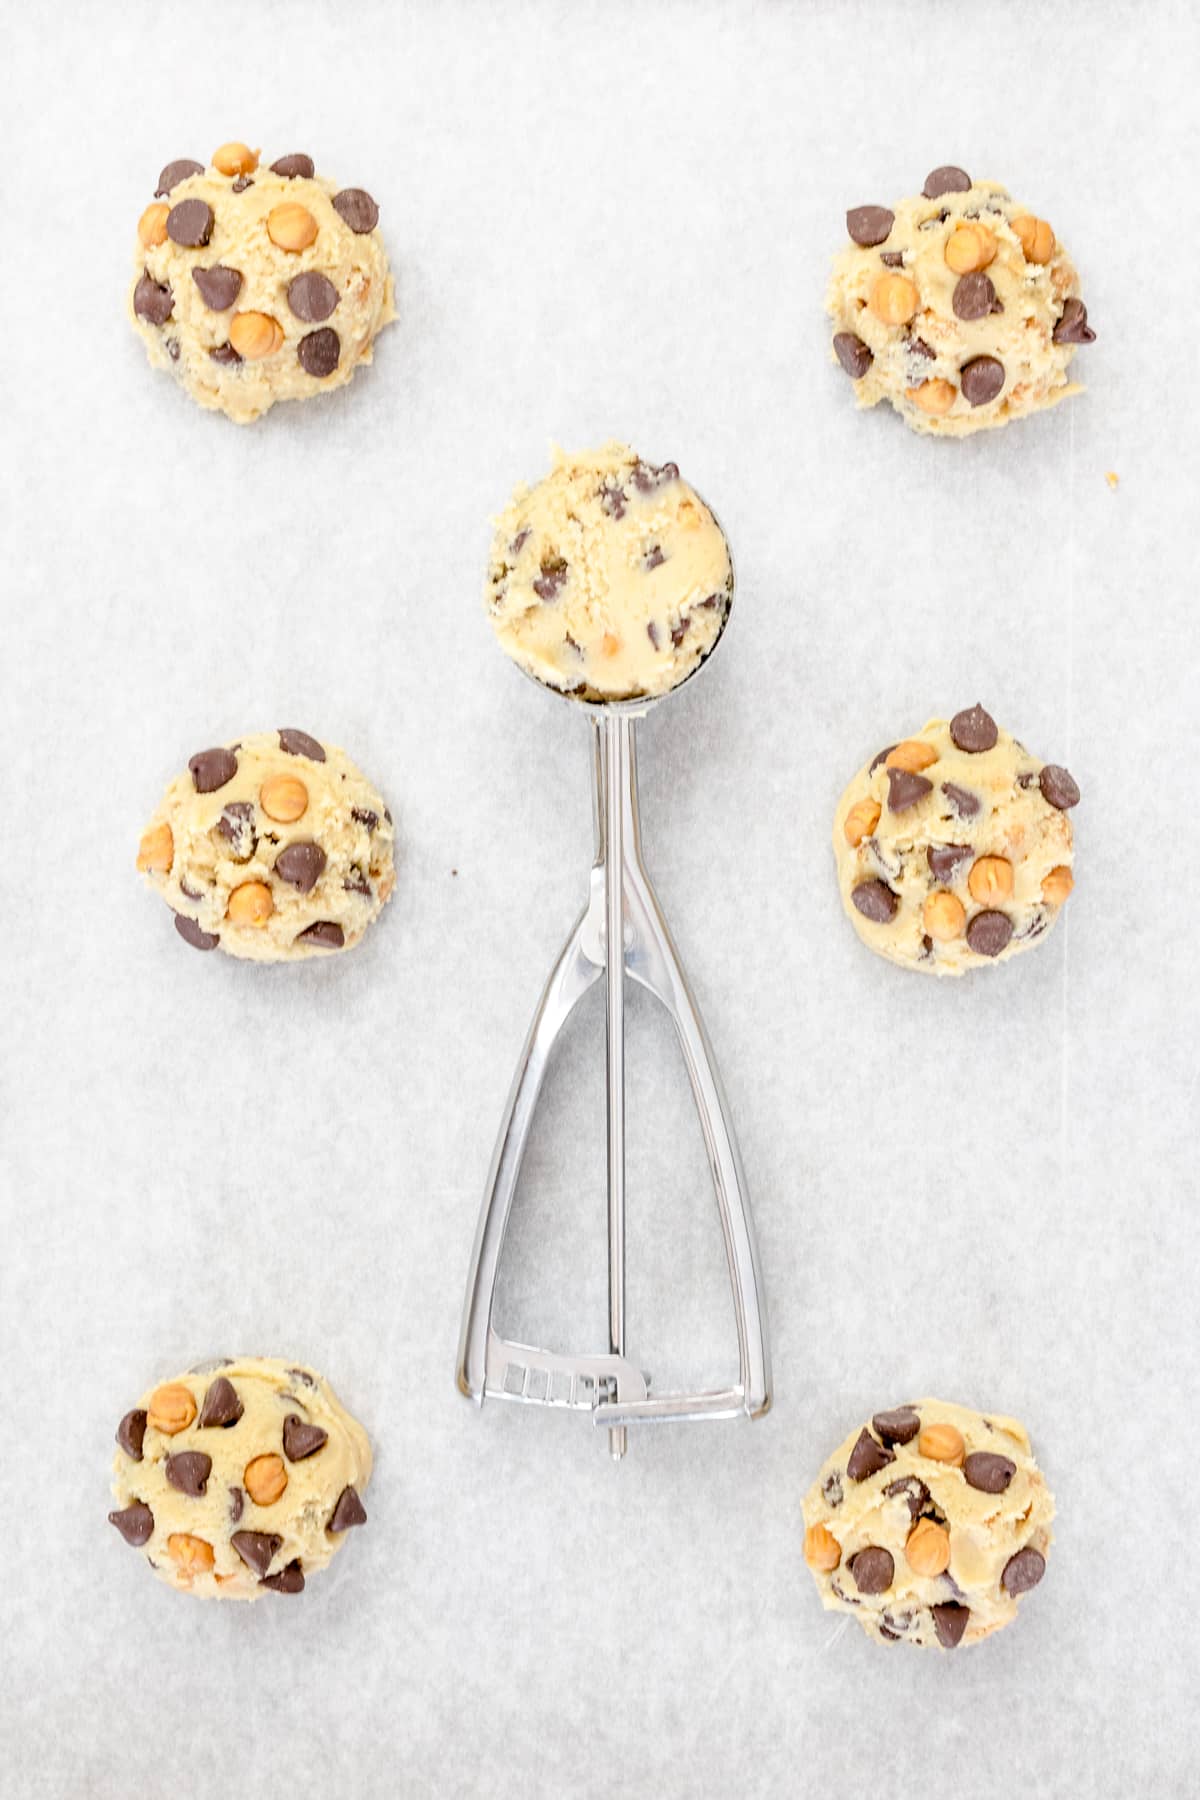 Top view of a cookie dough scoop filled with chocolate chip and caramel cookie dough surrounded by other cookie dough balls on a baking tray lined with parchment paper.